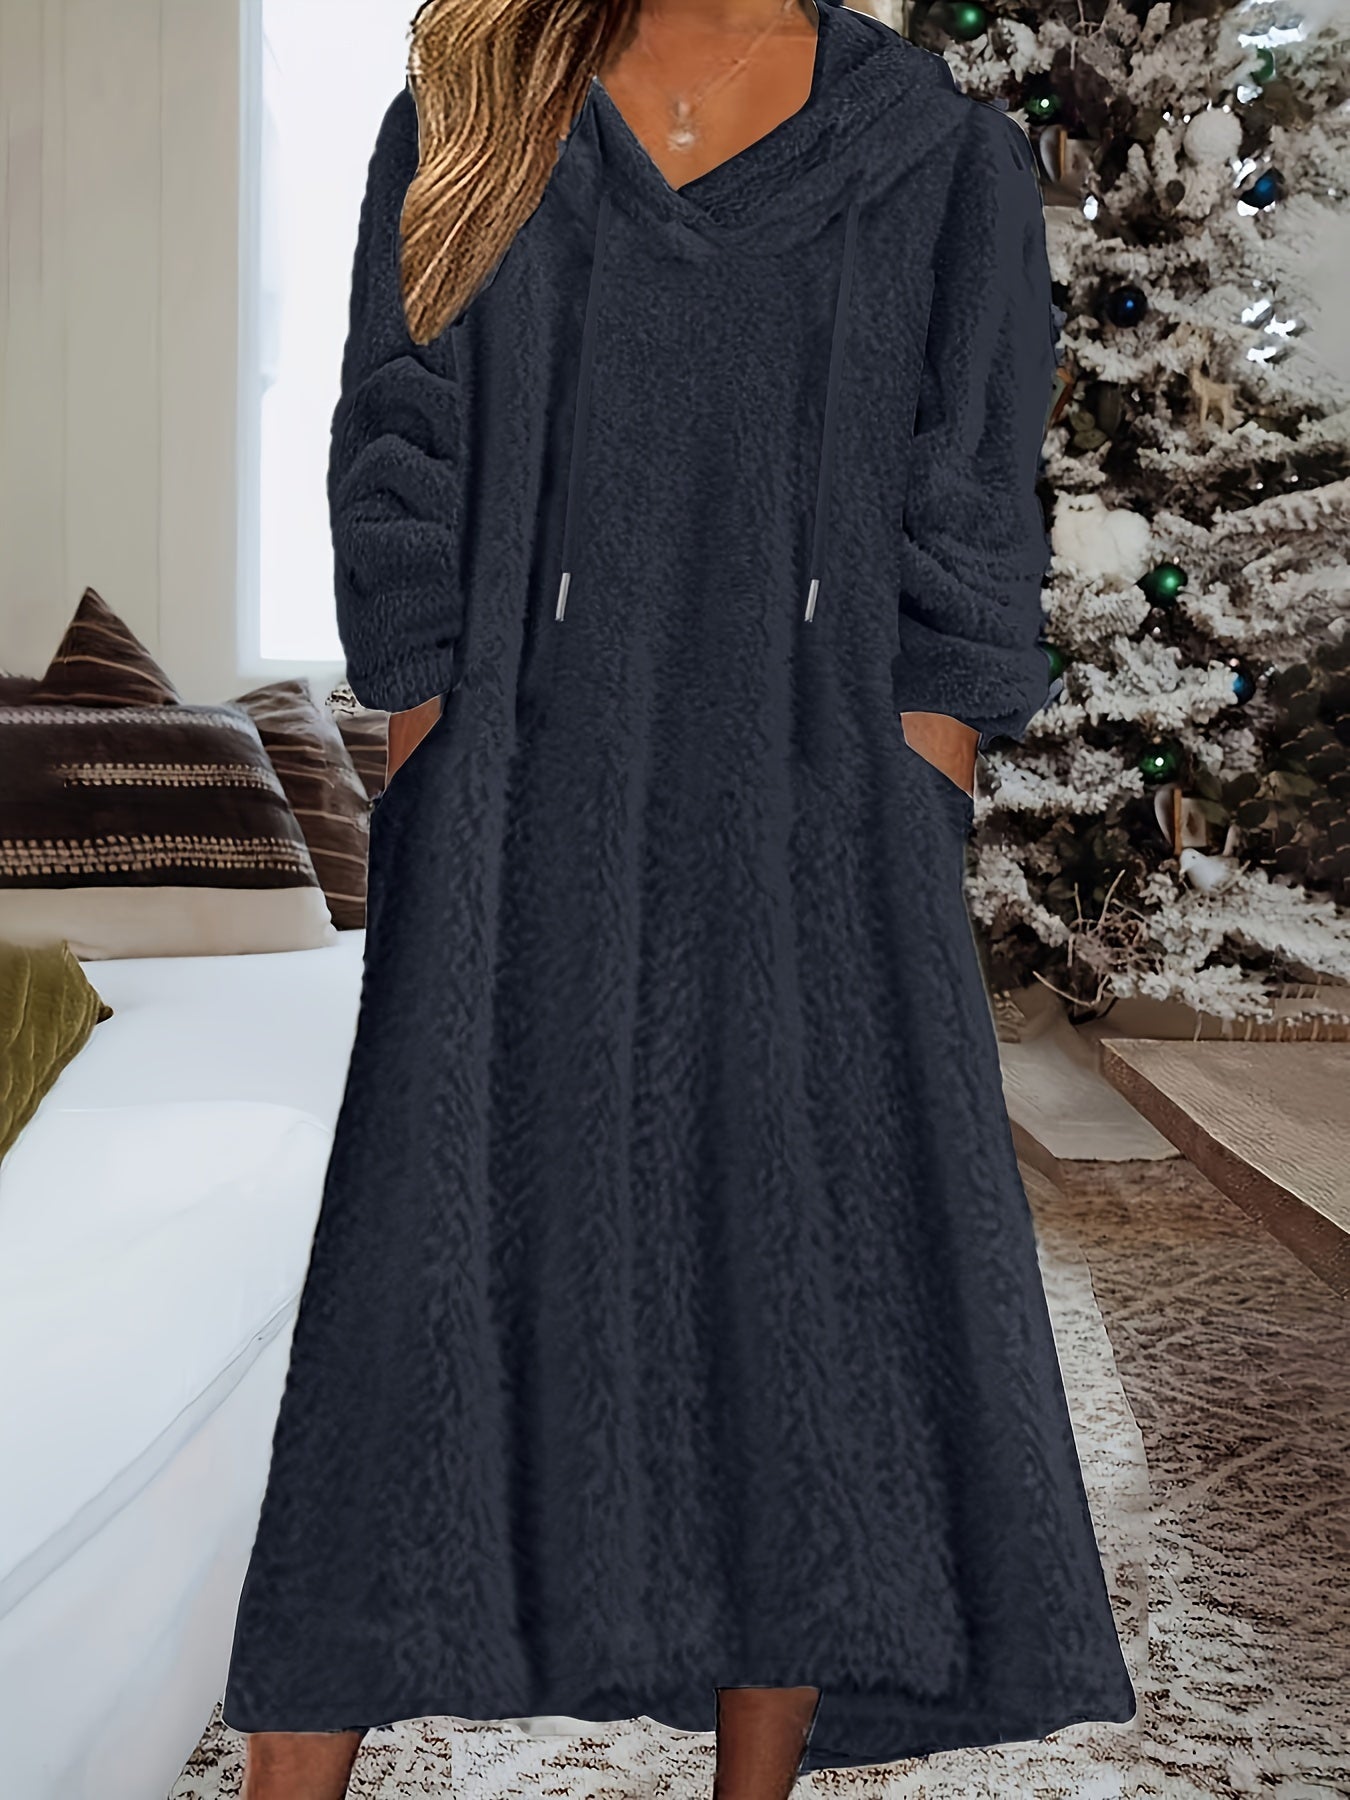 Plus Size Casual Dress, Women's Plus Solid Fleece Long Sleeve Drawstring Hooded Dress With Pockets